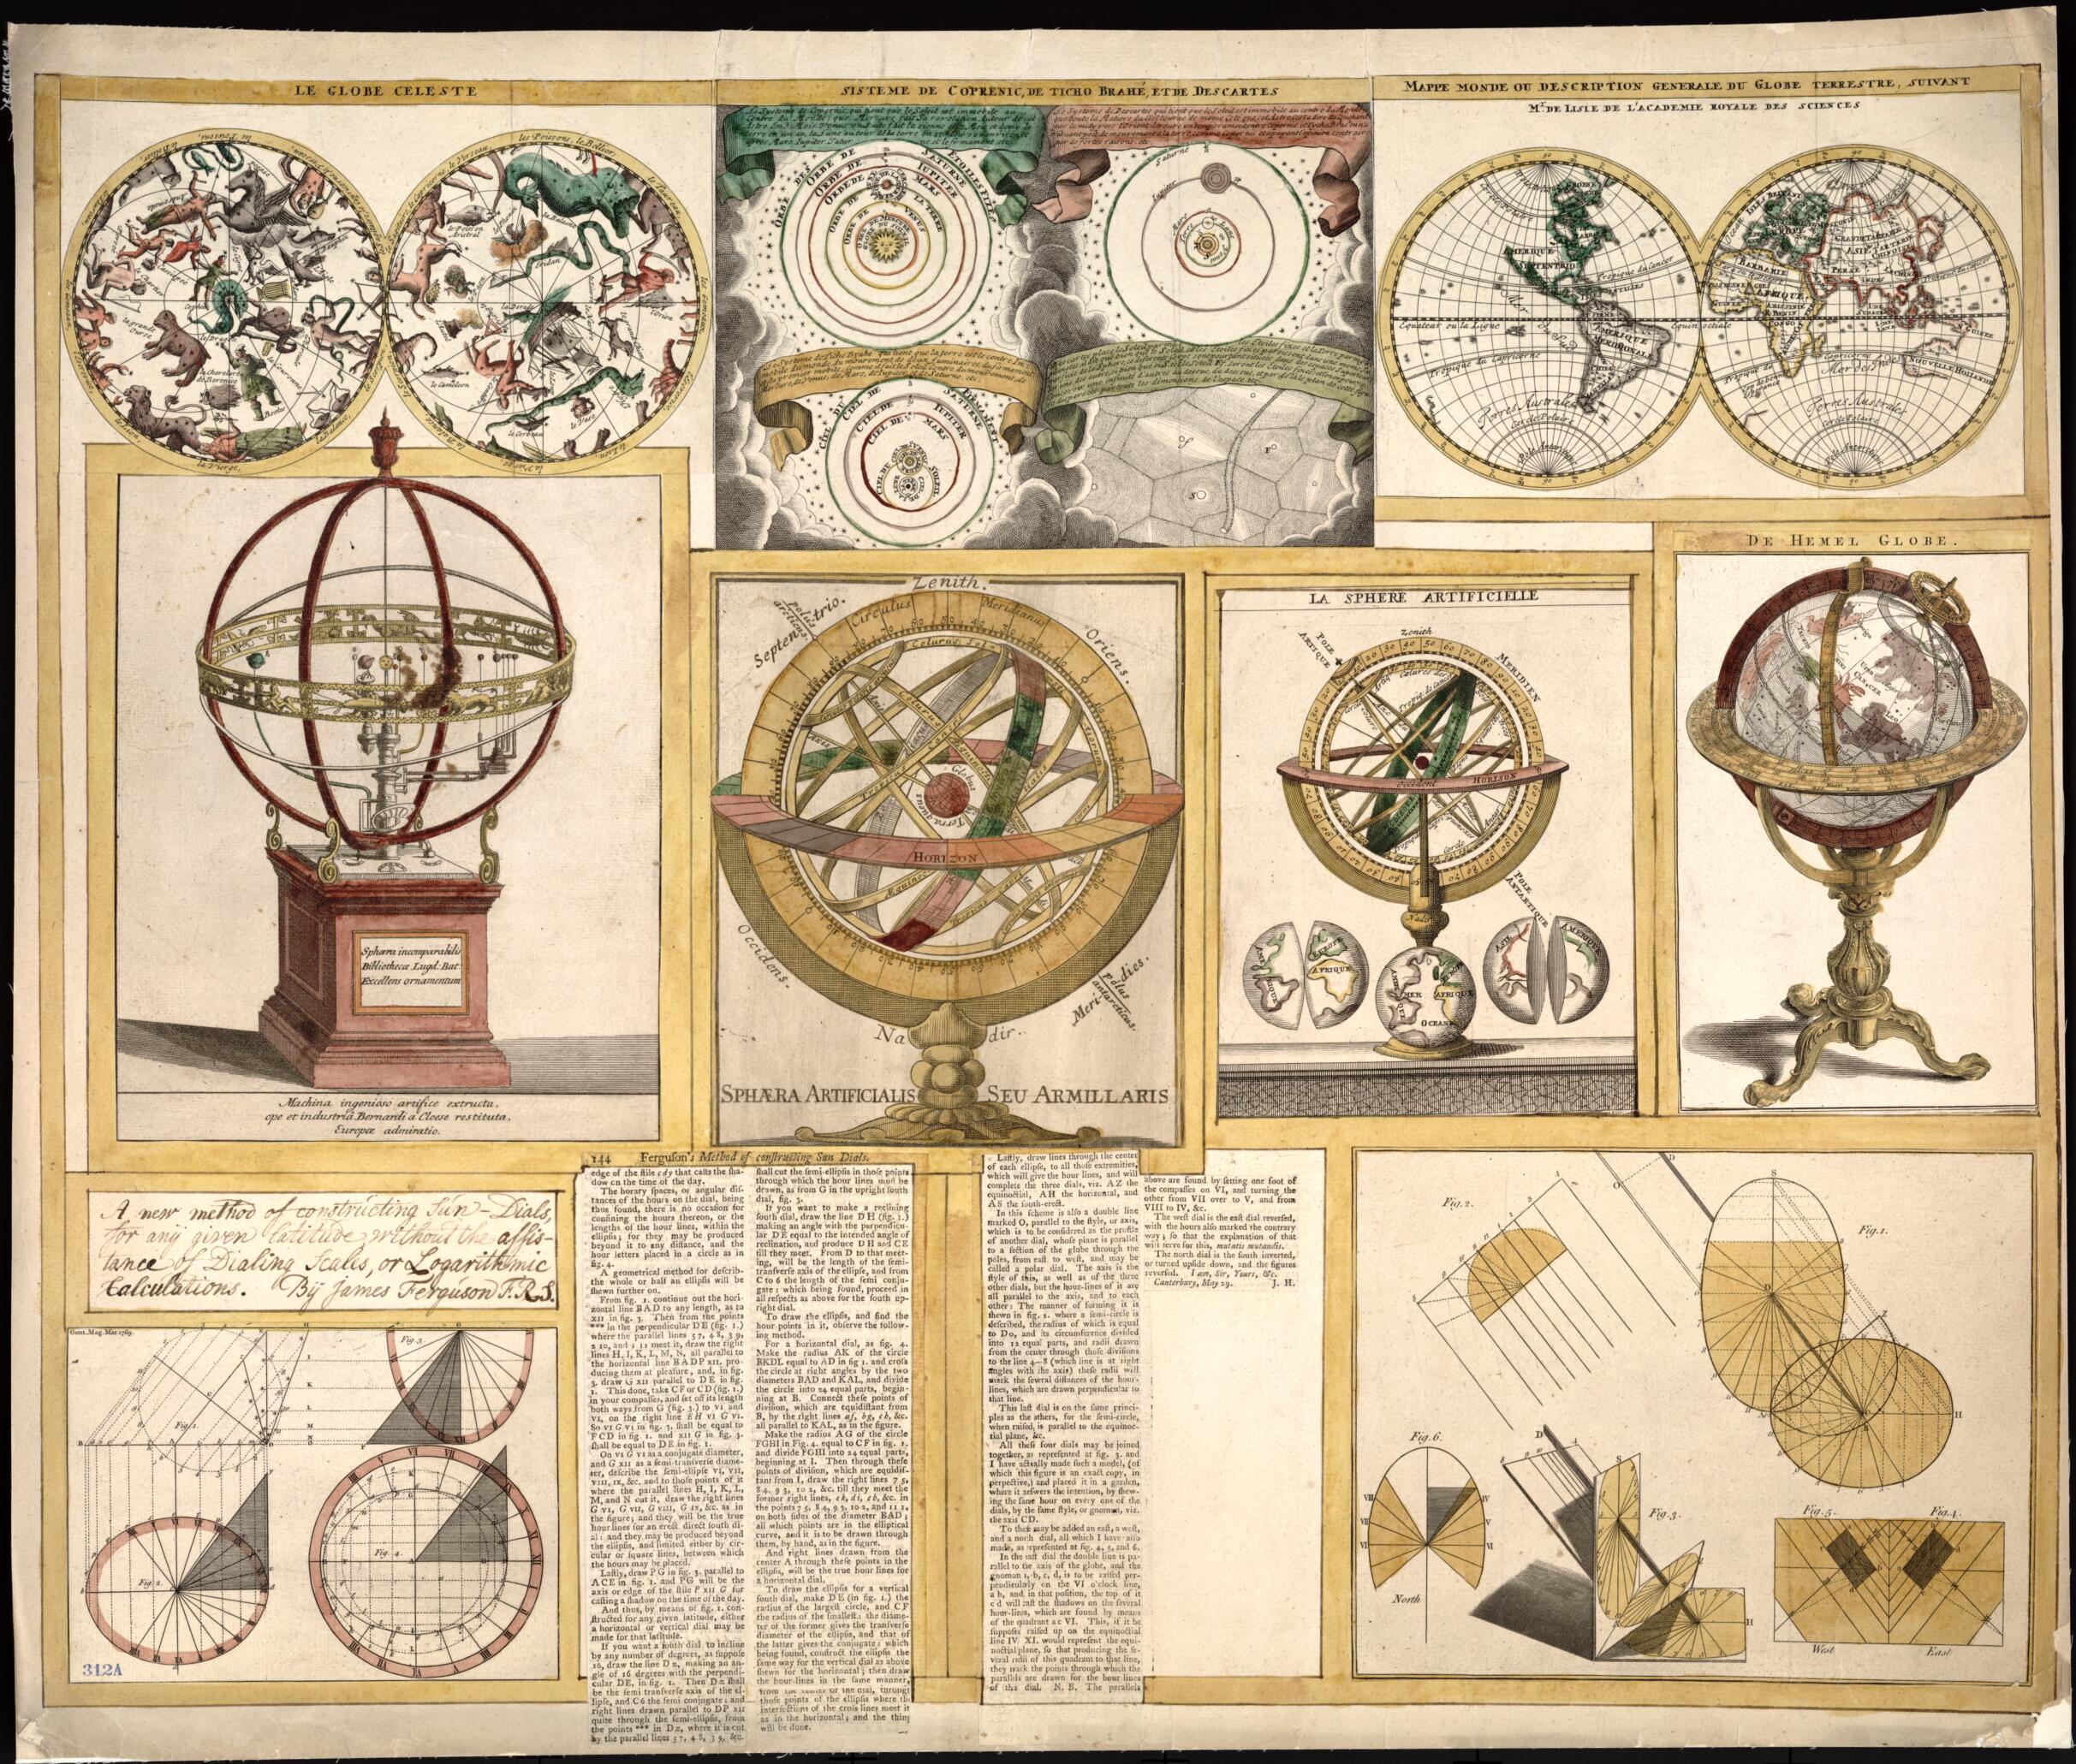 This old map of Collection of Nine Images Including Astronomical Instruments, Celestial Charts, and a World Map from 1769 was created by James Ferguson in 1769